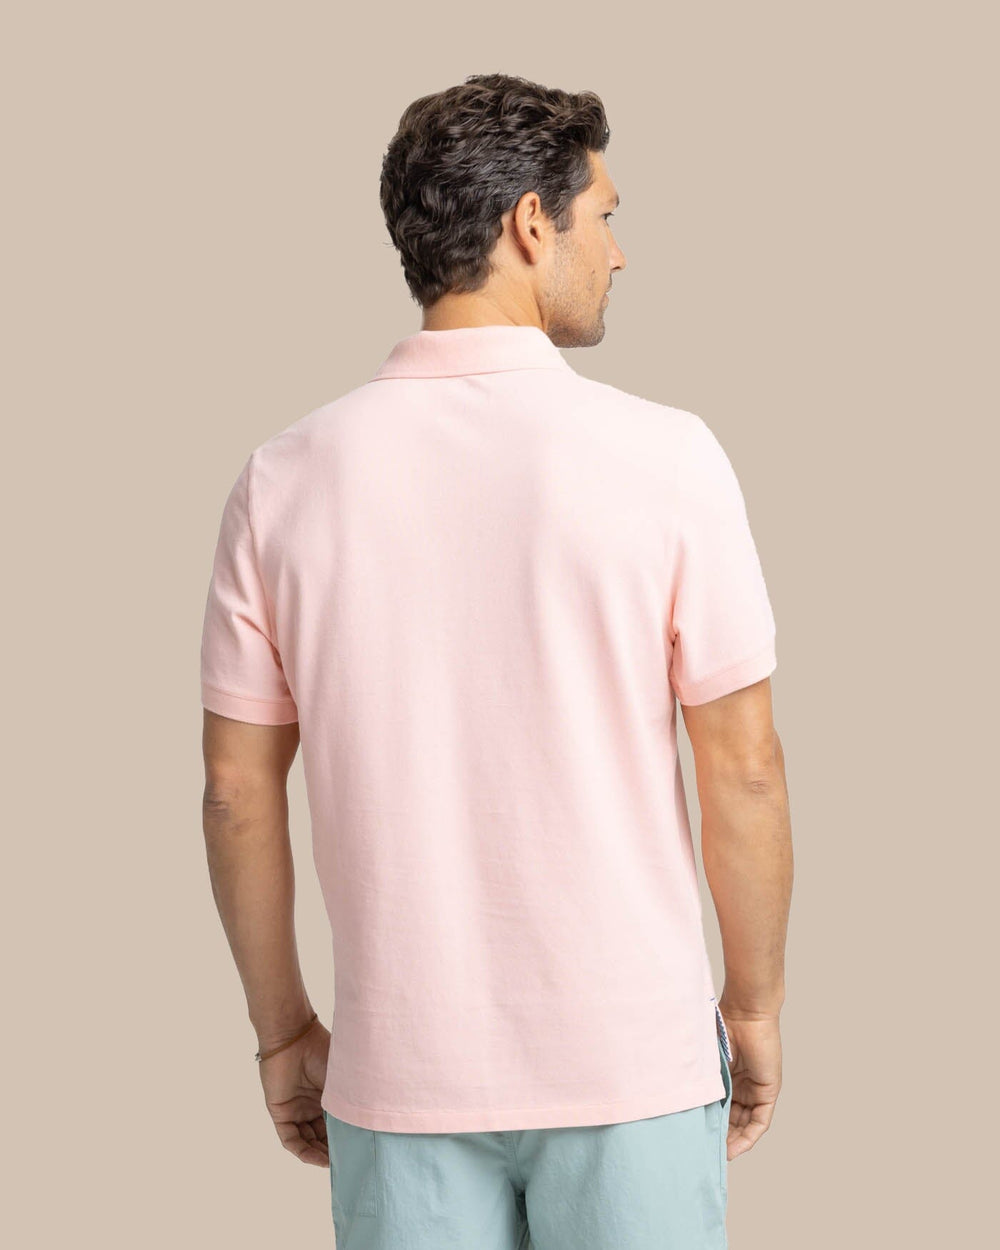 The back view of the Southern Tide new-skipjack-polo-shirt by Southern Tide - Pale Rosette Pink